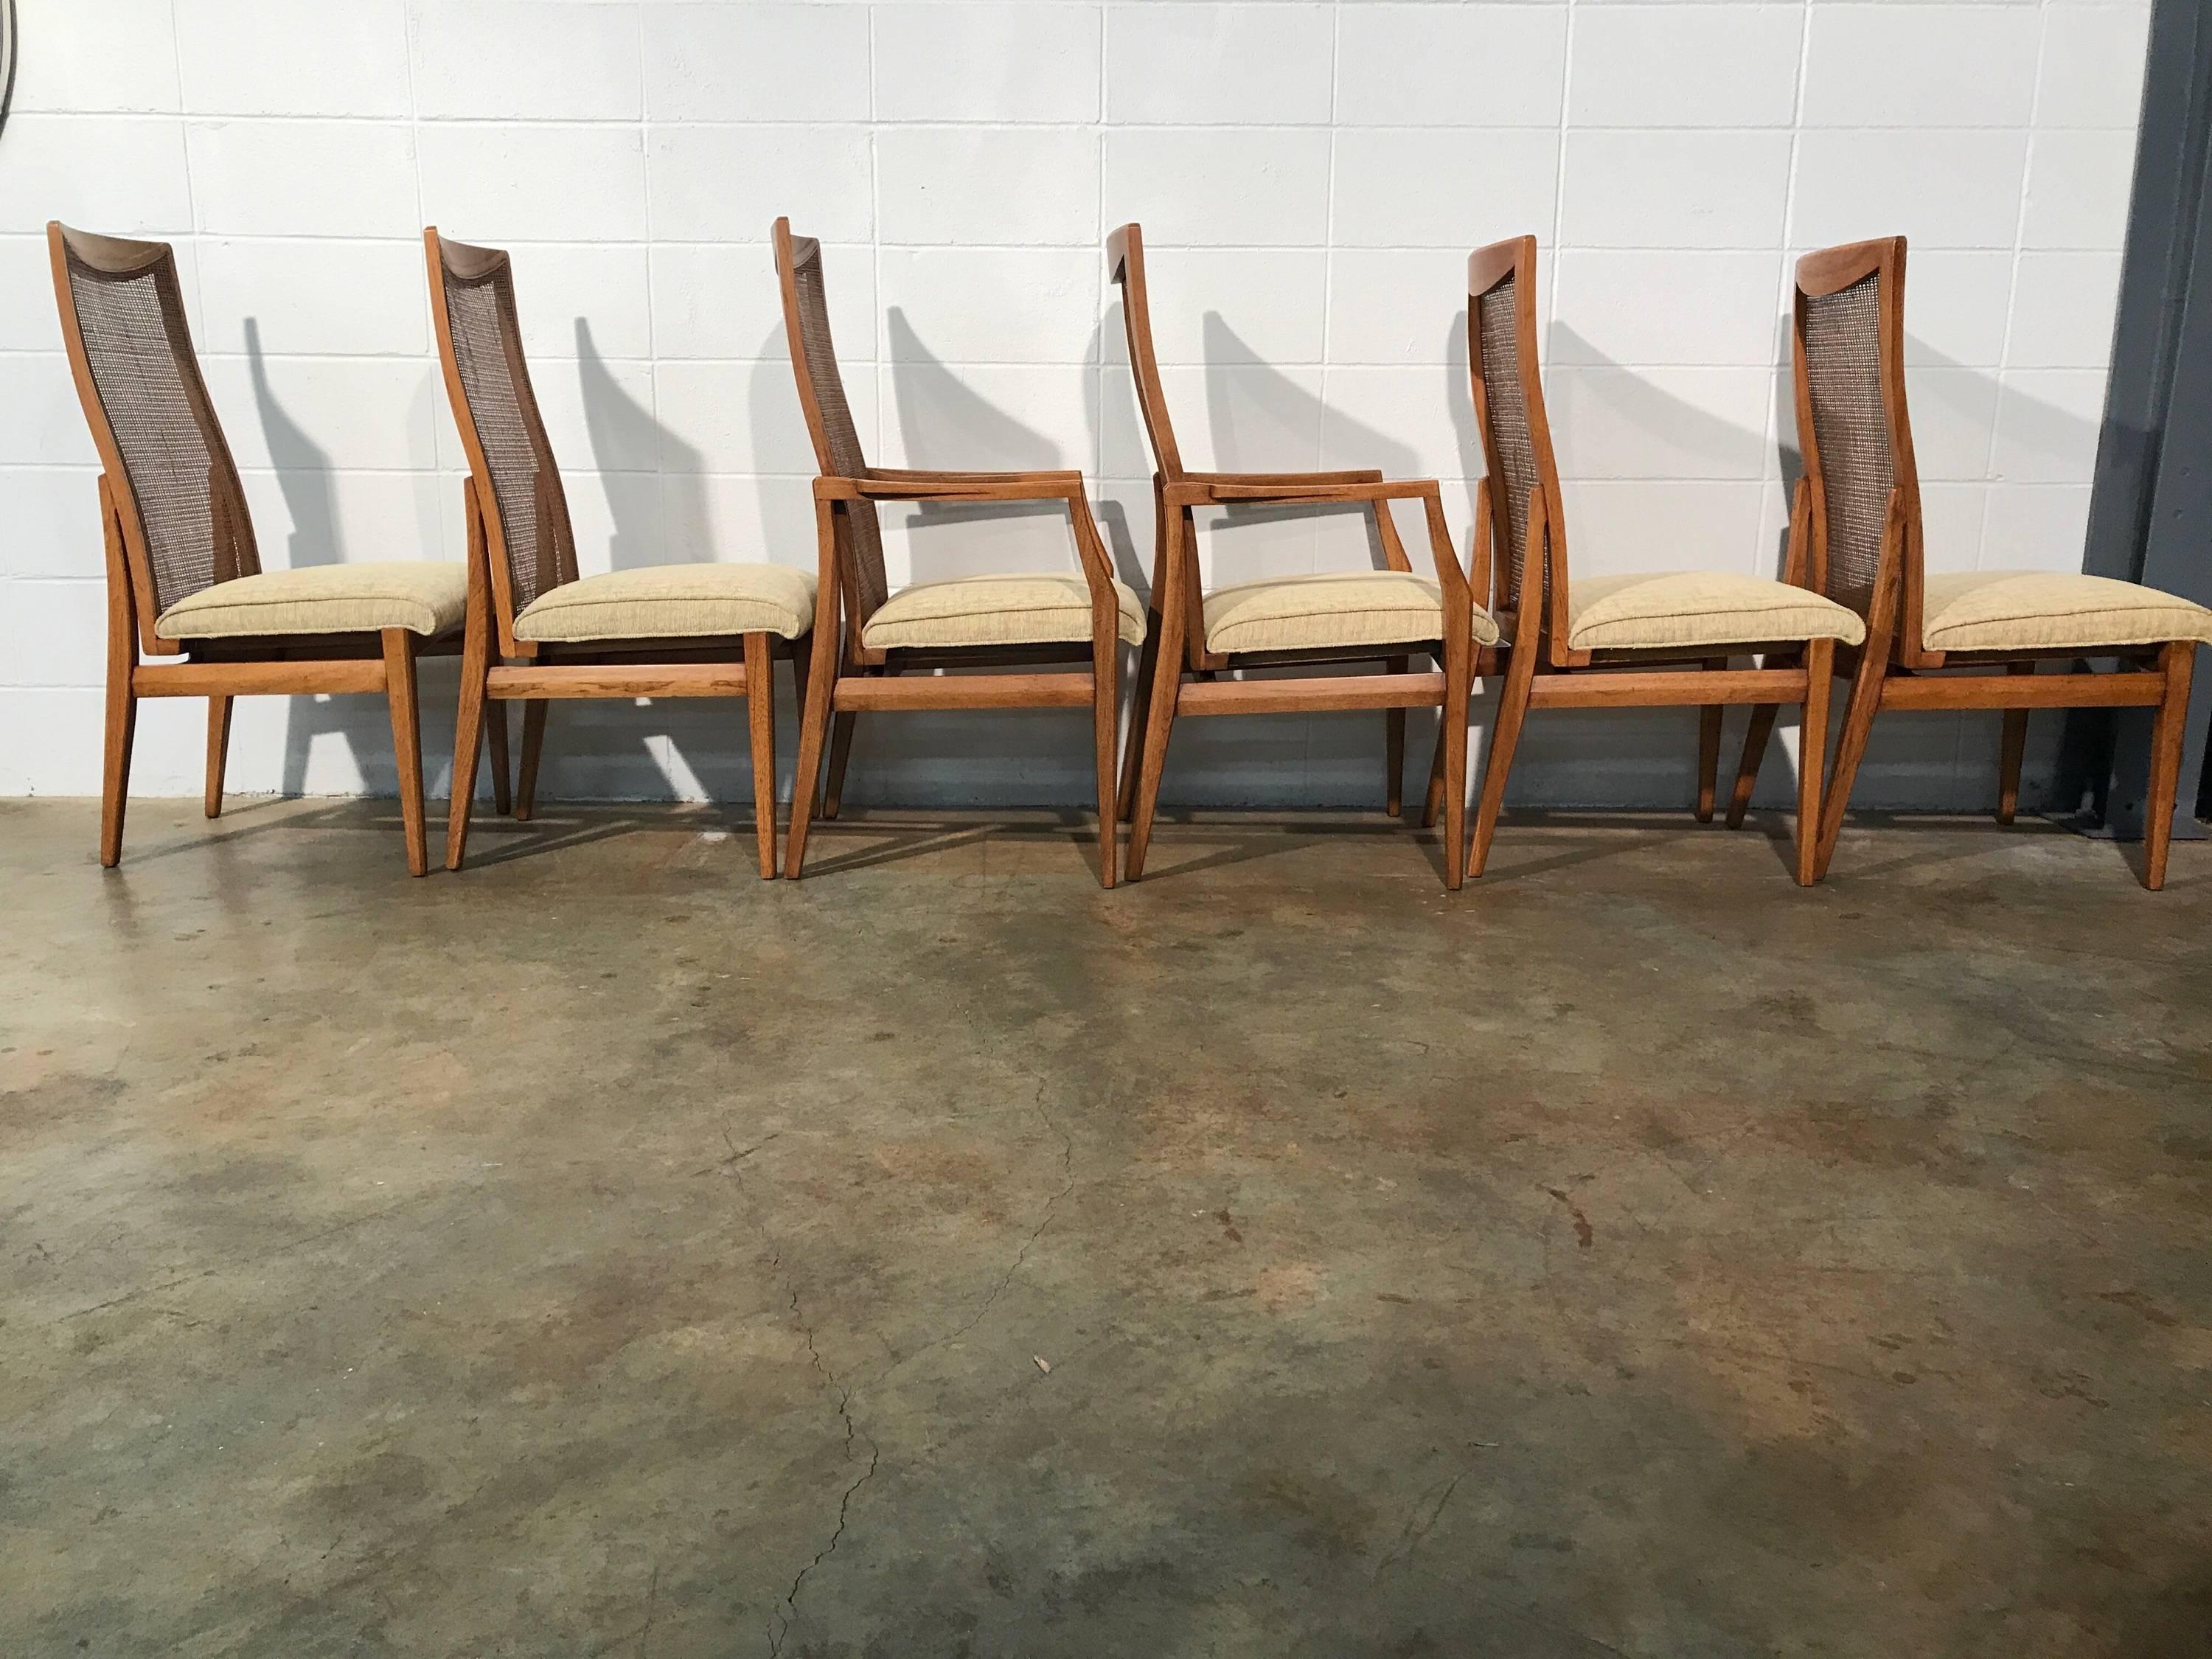 Cane Six Quality Mid-Century Modern Dining Chairs by Heritage Furniture